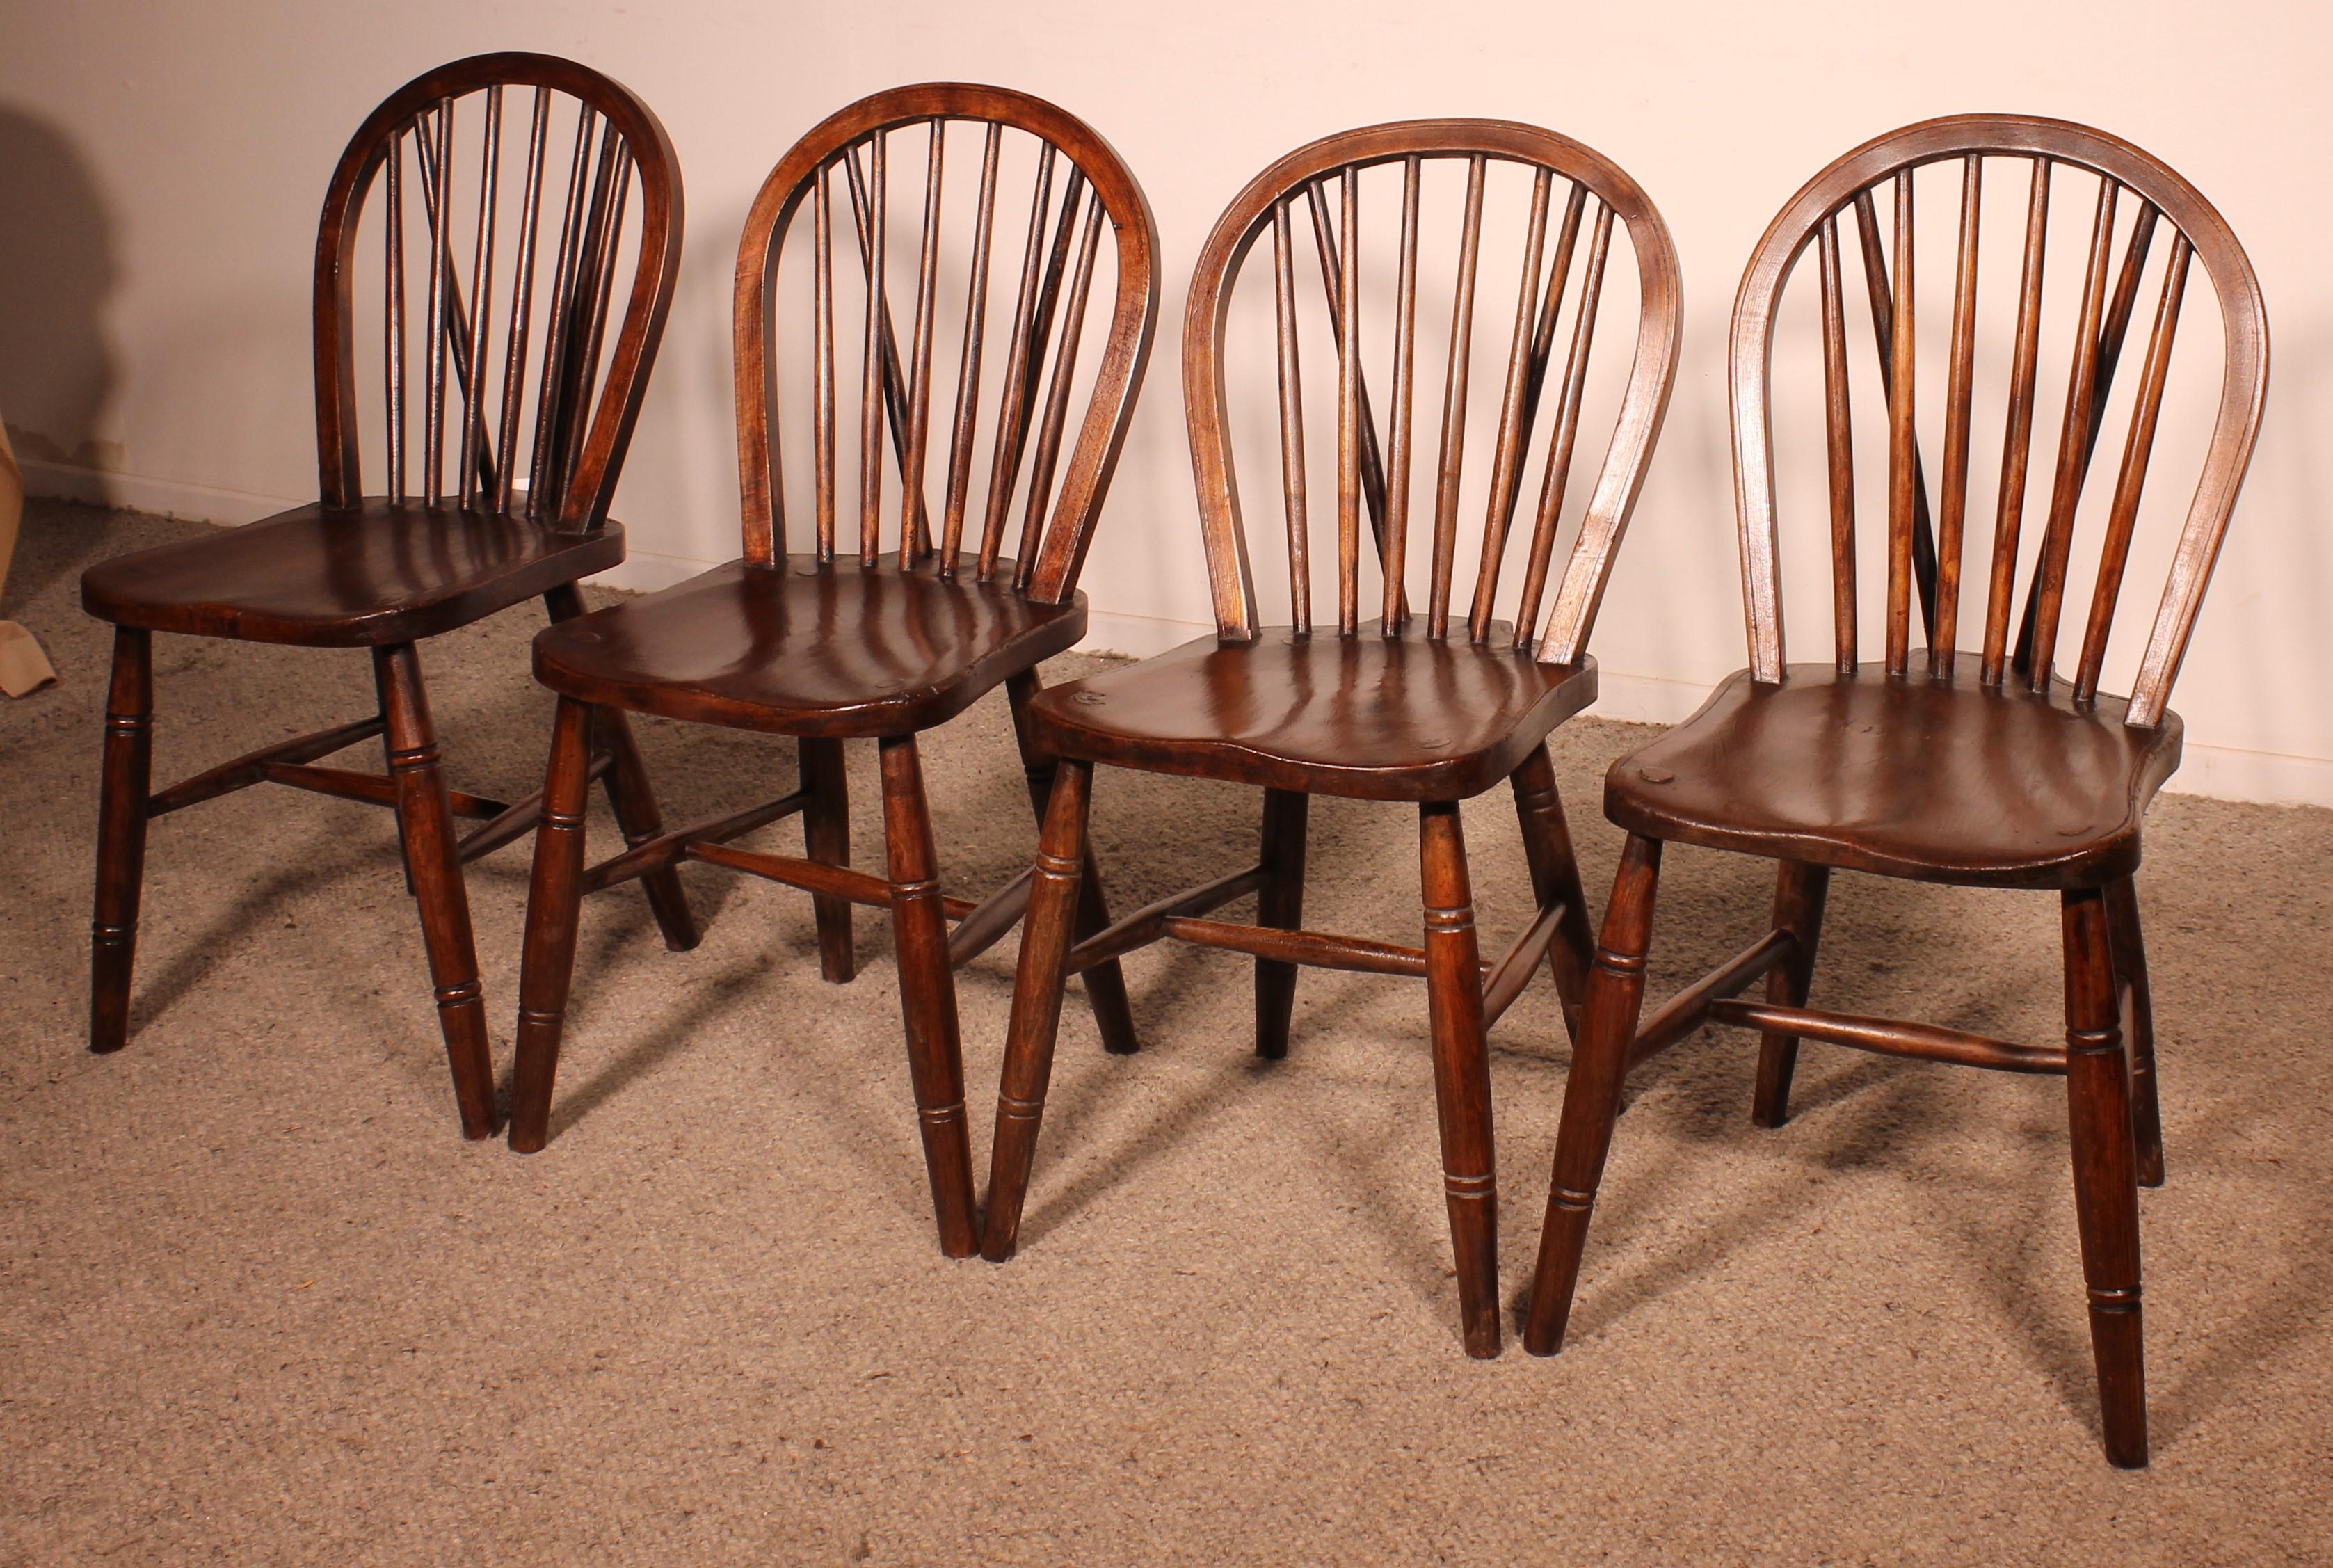 Chestnut Set Of 4 Windsor Chairs From The 19th Century For Sale